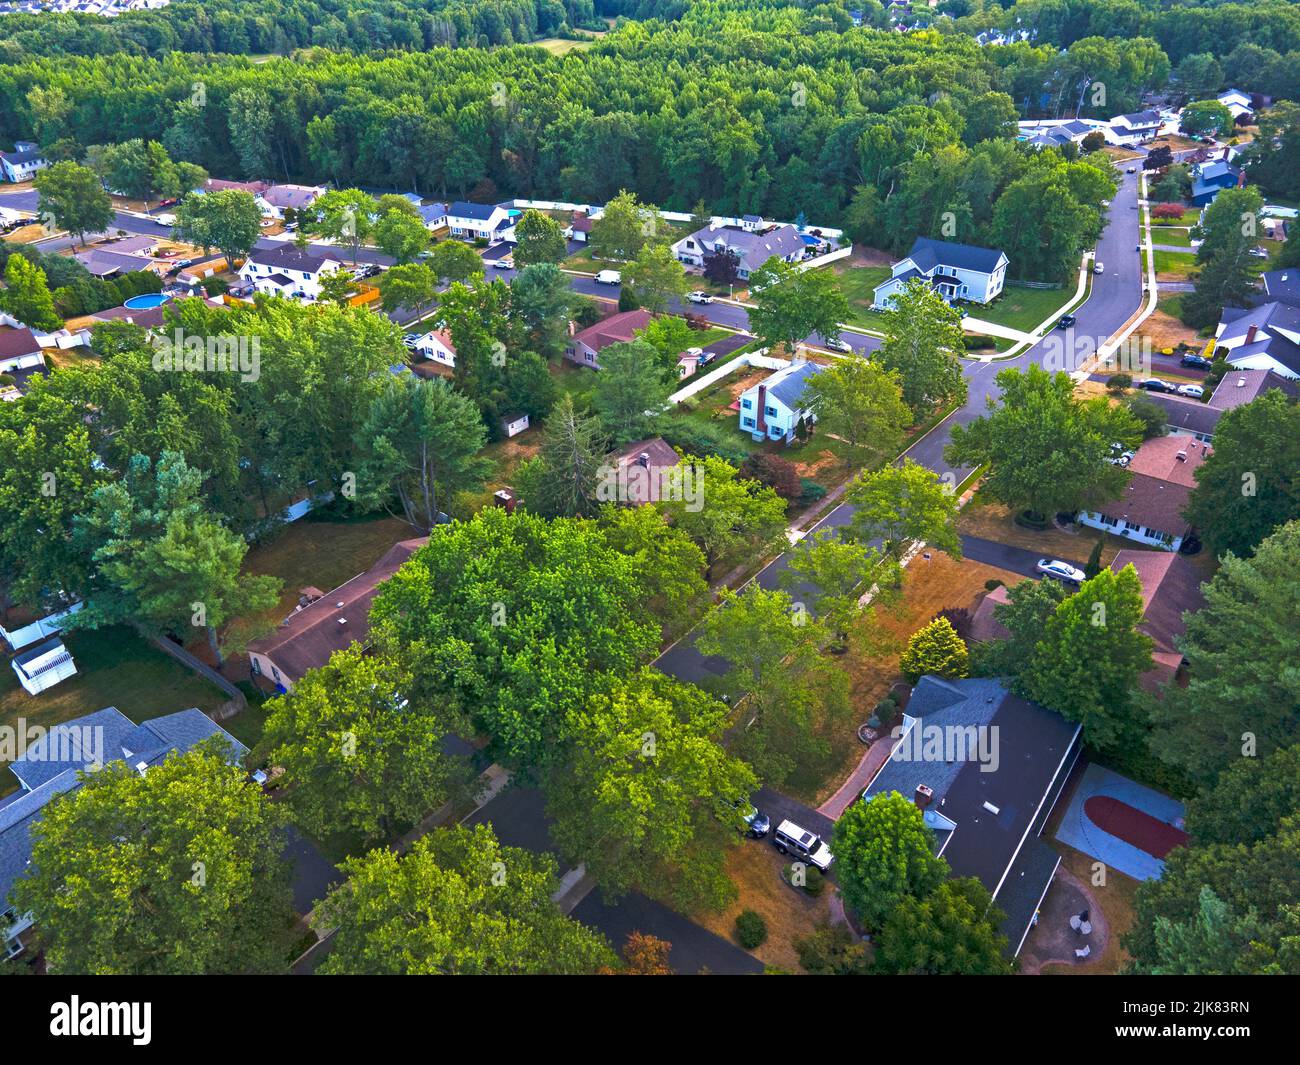 Panoramic aerial view of a section of Old Bridge township from above the tree tops showing brown lawns, the effects of a recent drought -09 Stock Photo